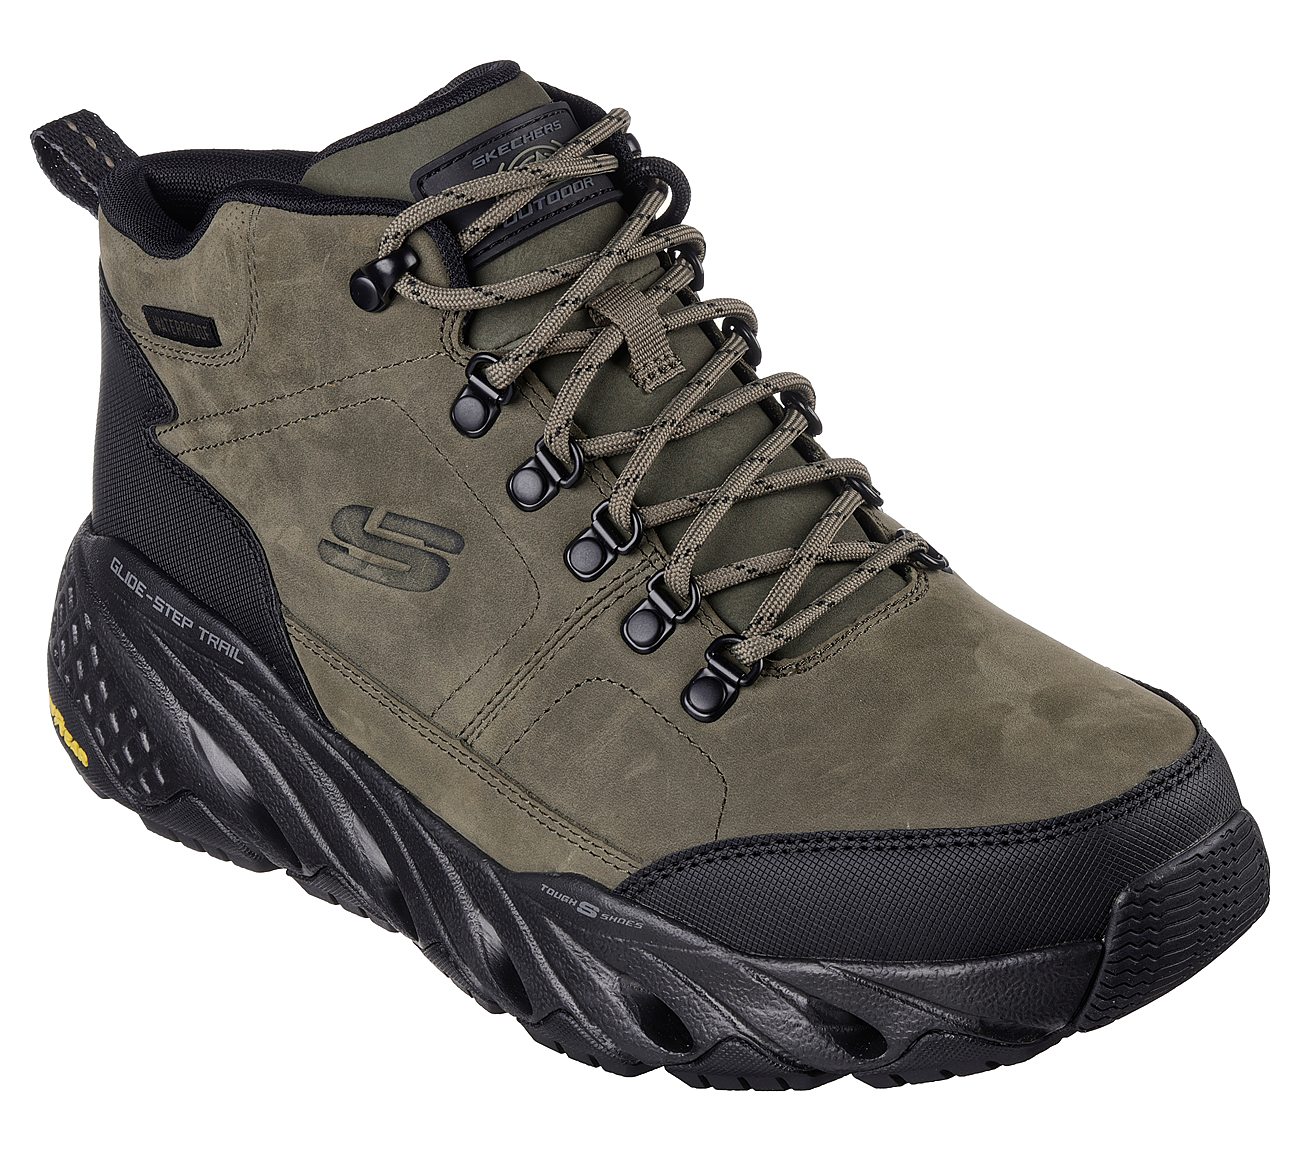 GLIDE-STEP TRAIL, OLIVE/BLACK Footwear Right View